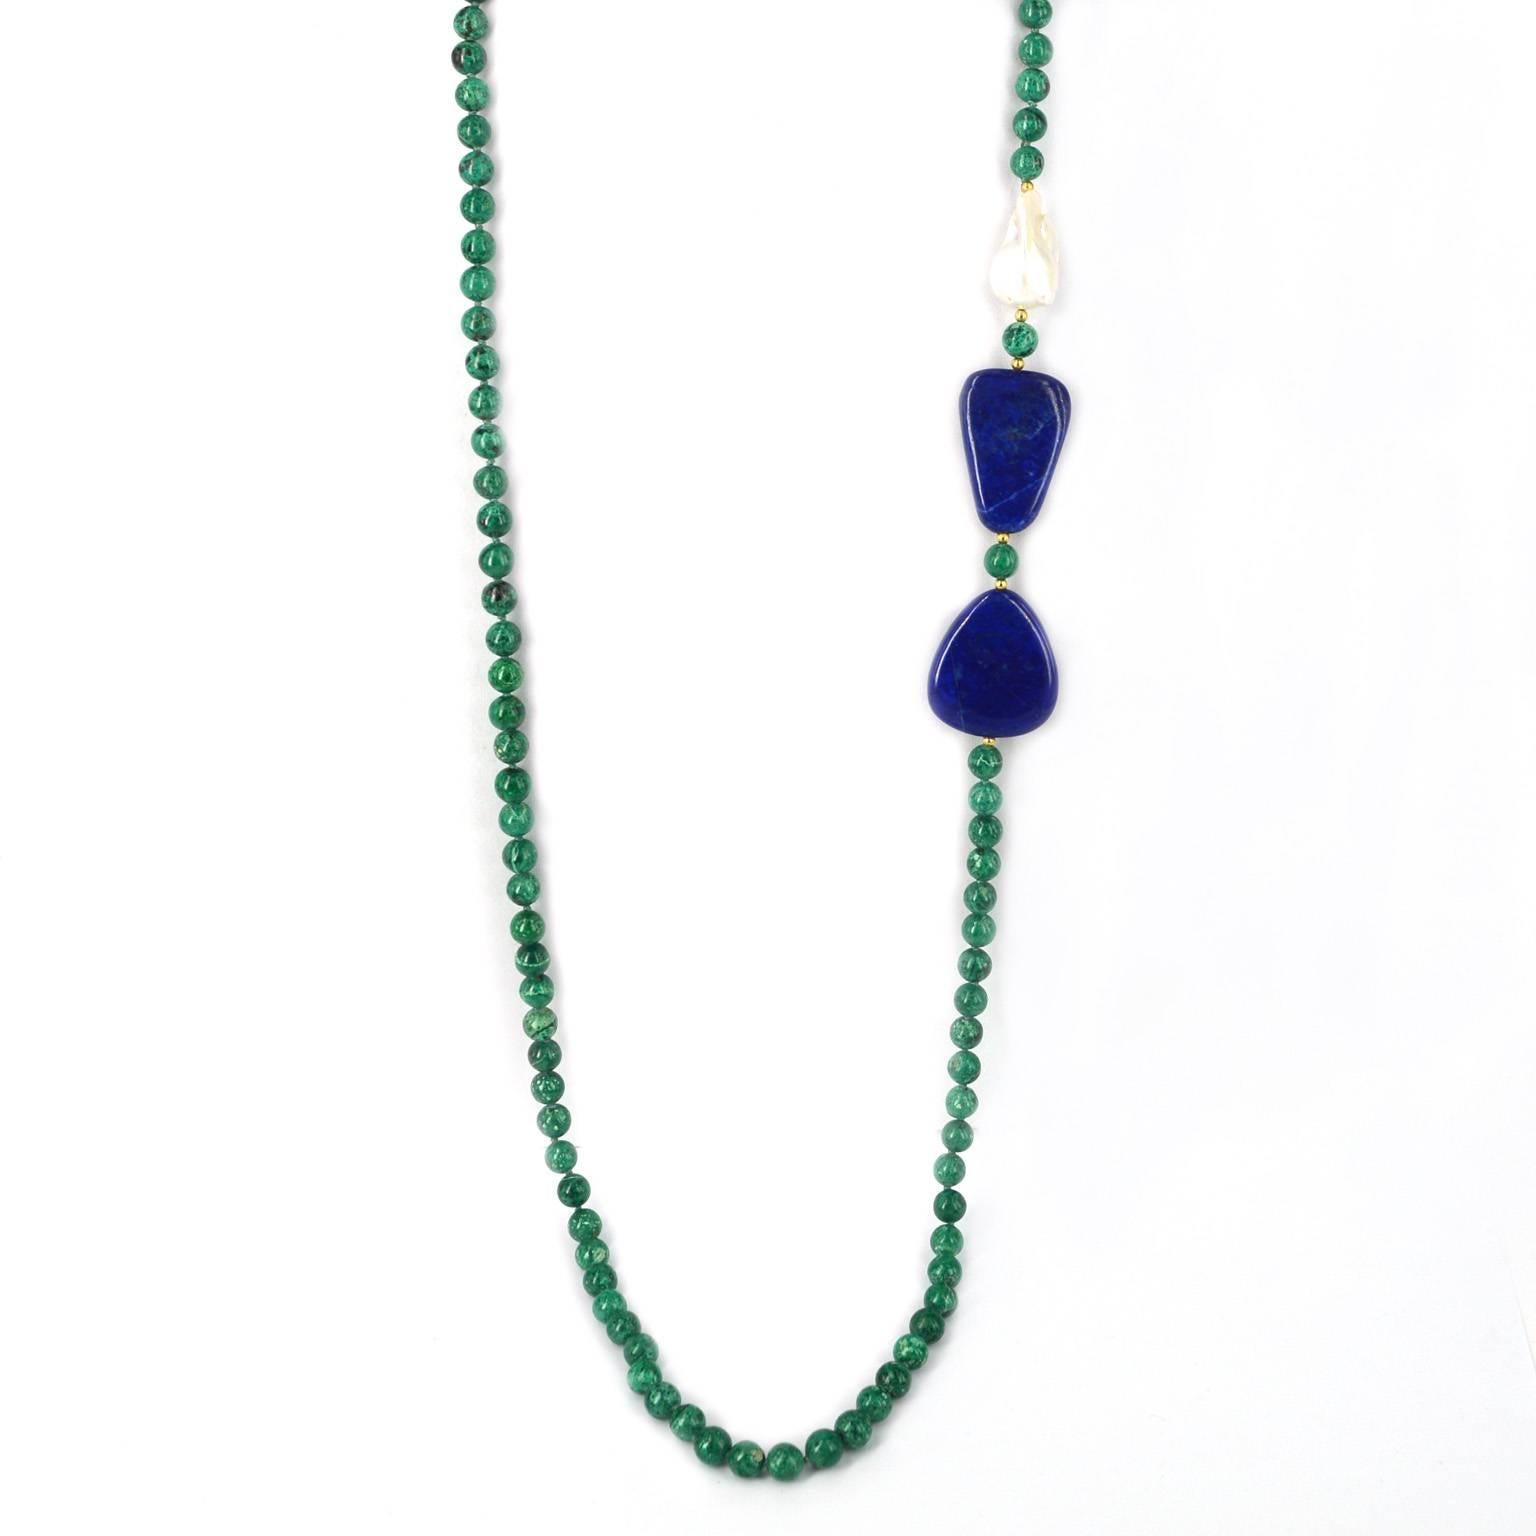 A combination of flat polished Lapis Lazuli, Freshwater Baroque Pearl and Chrysocolla beads hand knotted on thread. 14k gold filled beads highlight this feature.
8mm polished round Chrysocolla beads, Lapis beads are approximately 35mm each and the